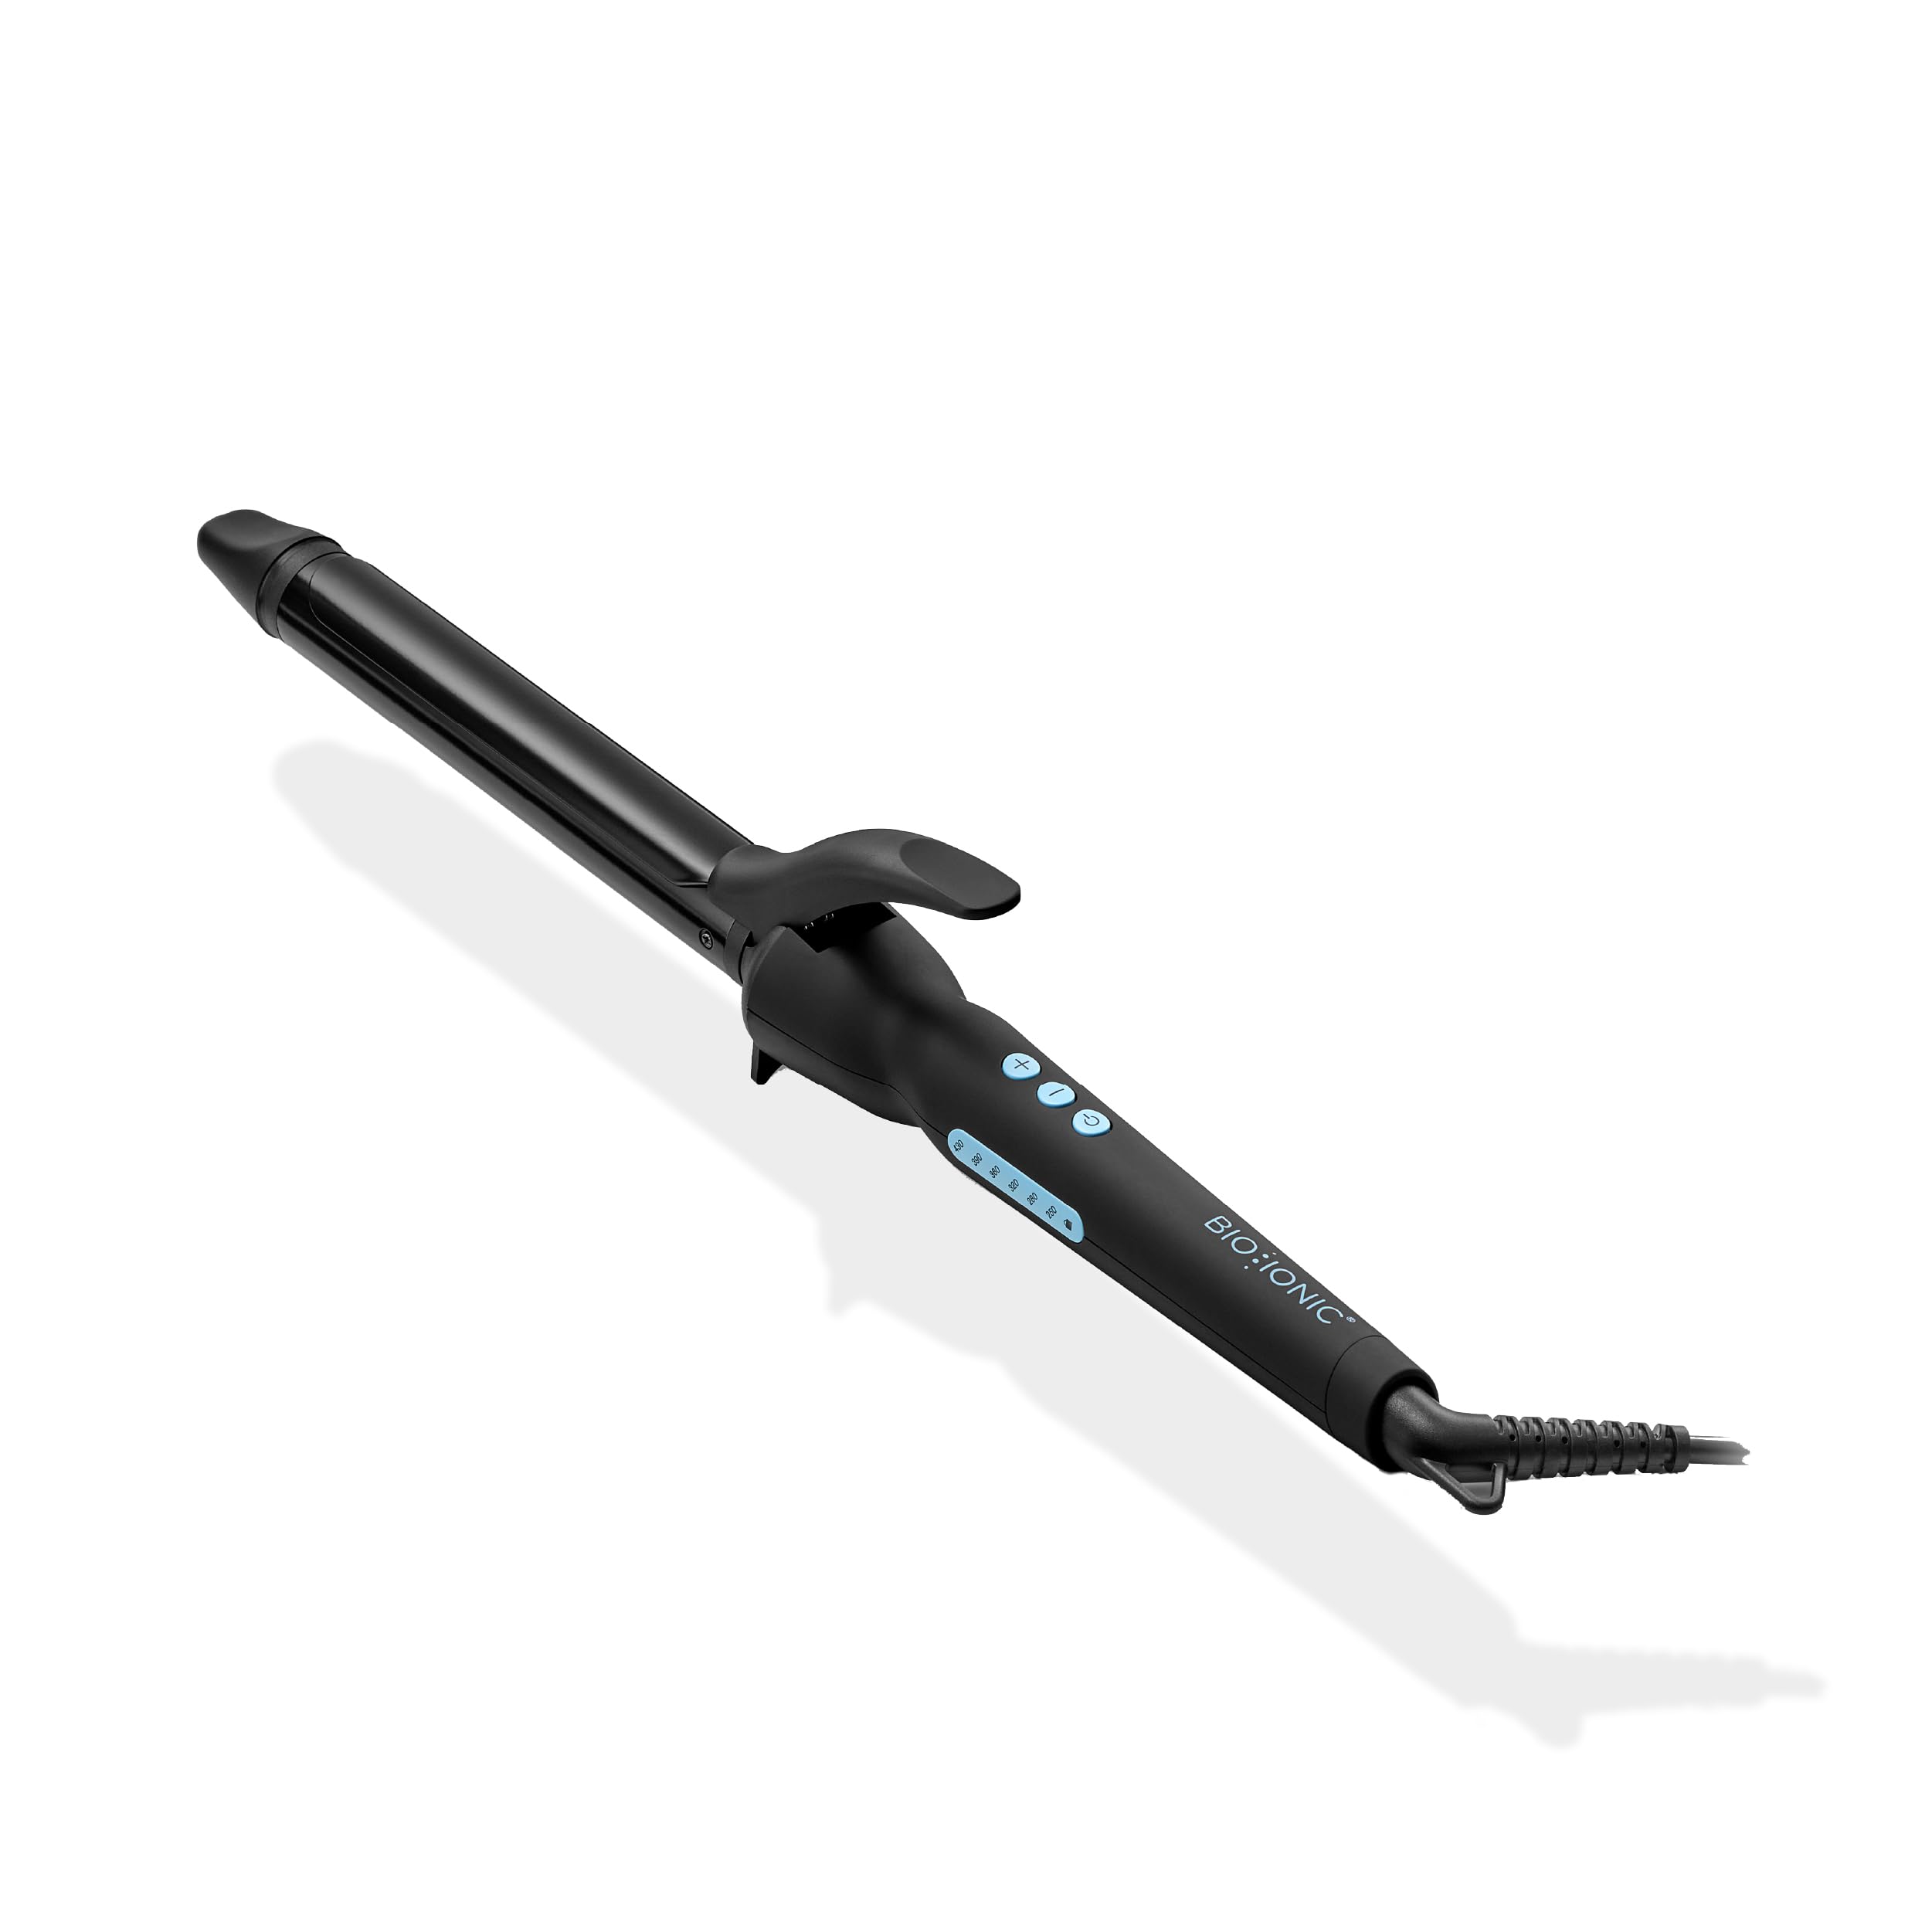 BIO IONIC Z-FGTST-CL-1.0 WITH LONG BARREL CURLING IRON